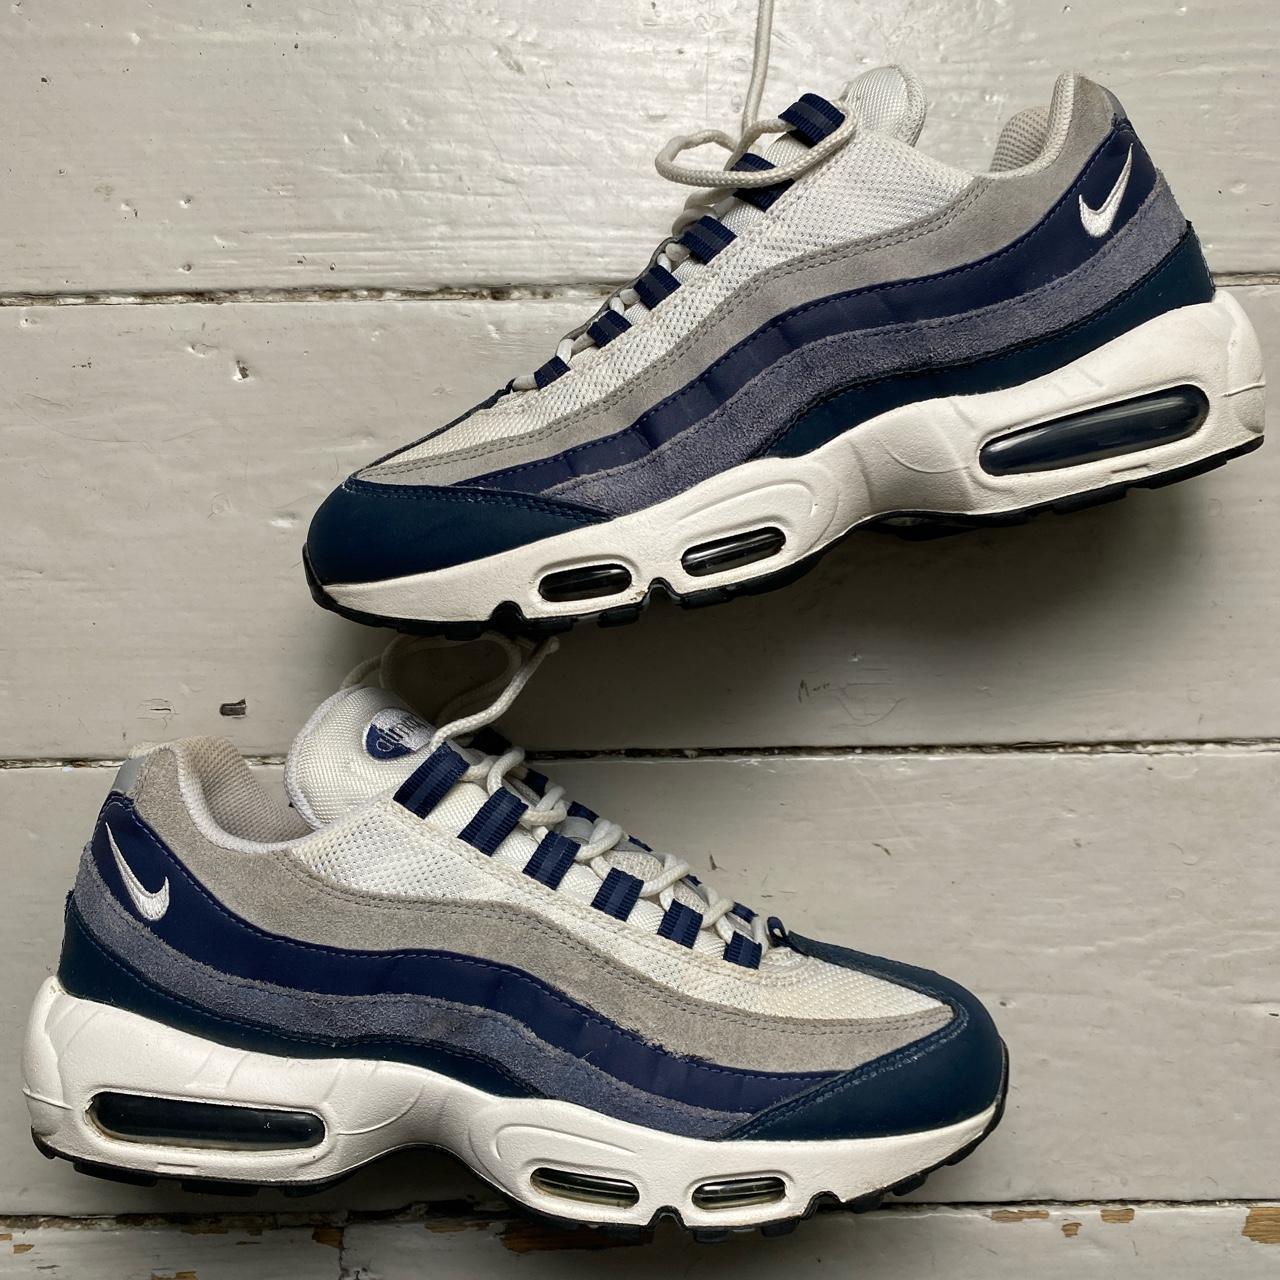 Nike Air Max 95 Midnight Navy Grey and White